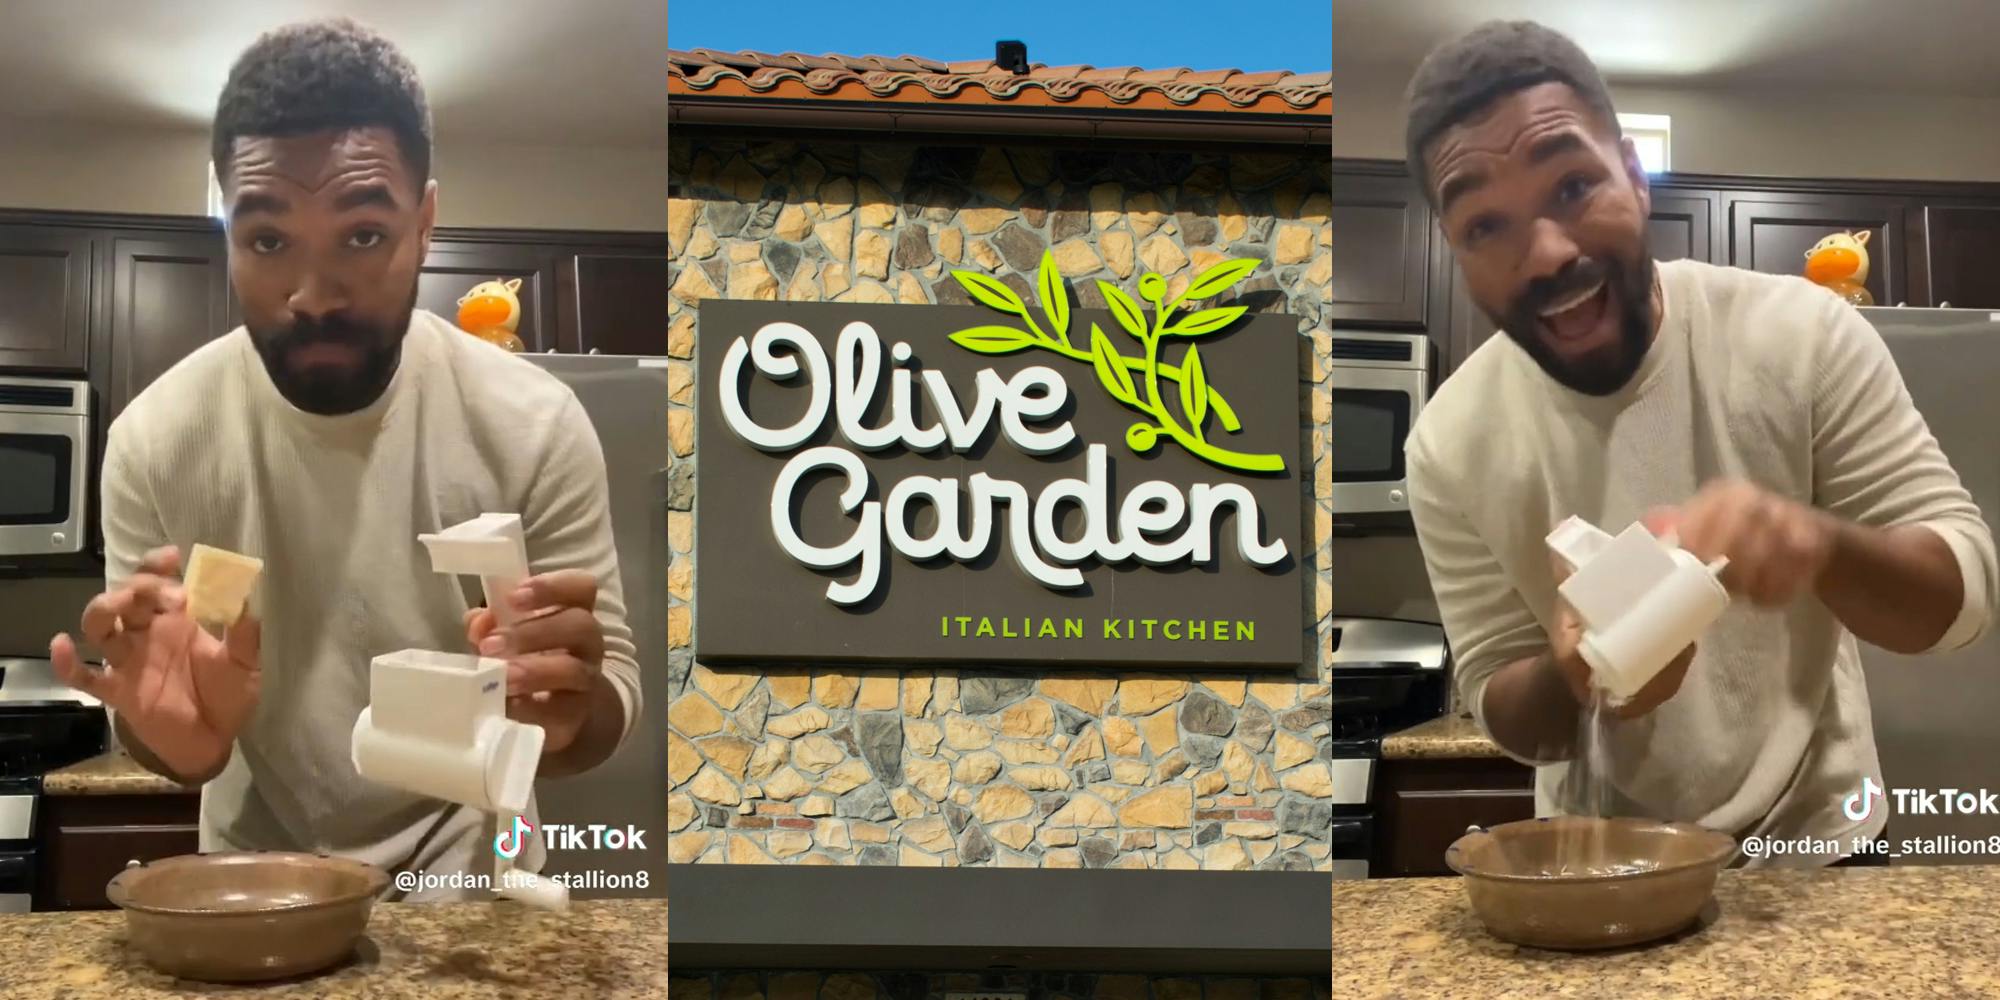 Olive Garden Customer Discovers She Can Buy Cheese Grater